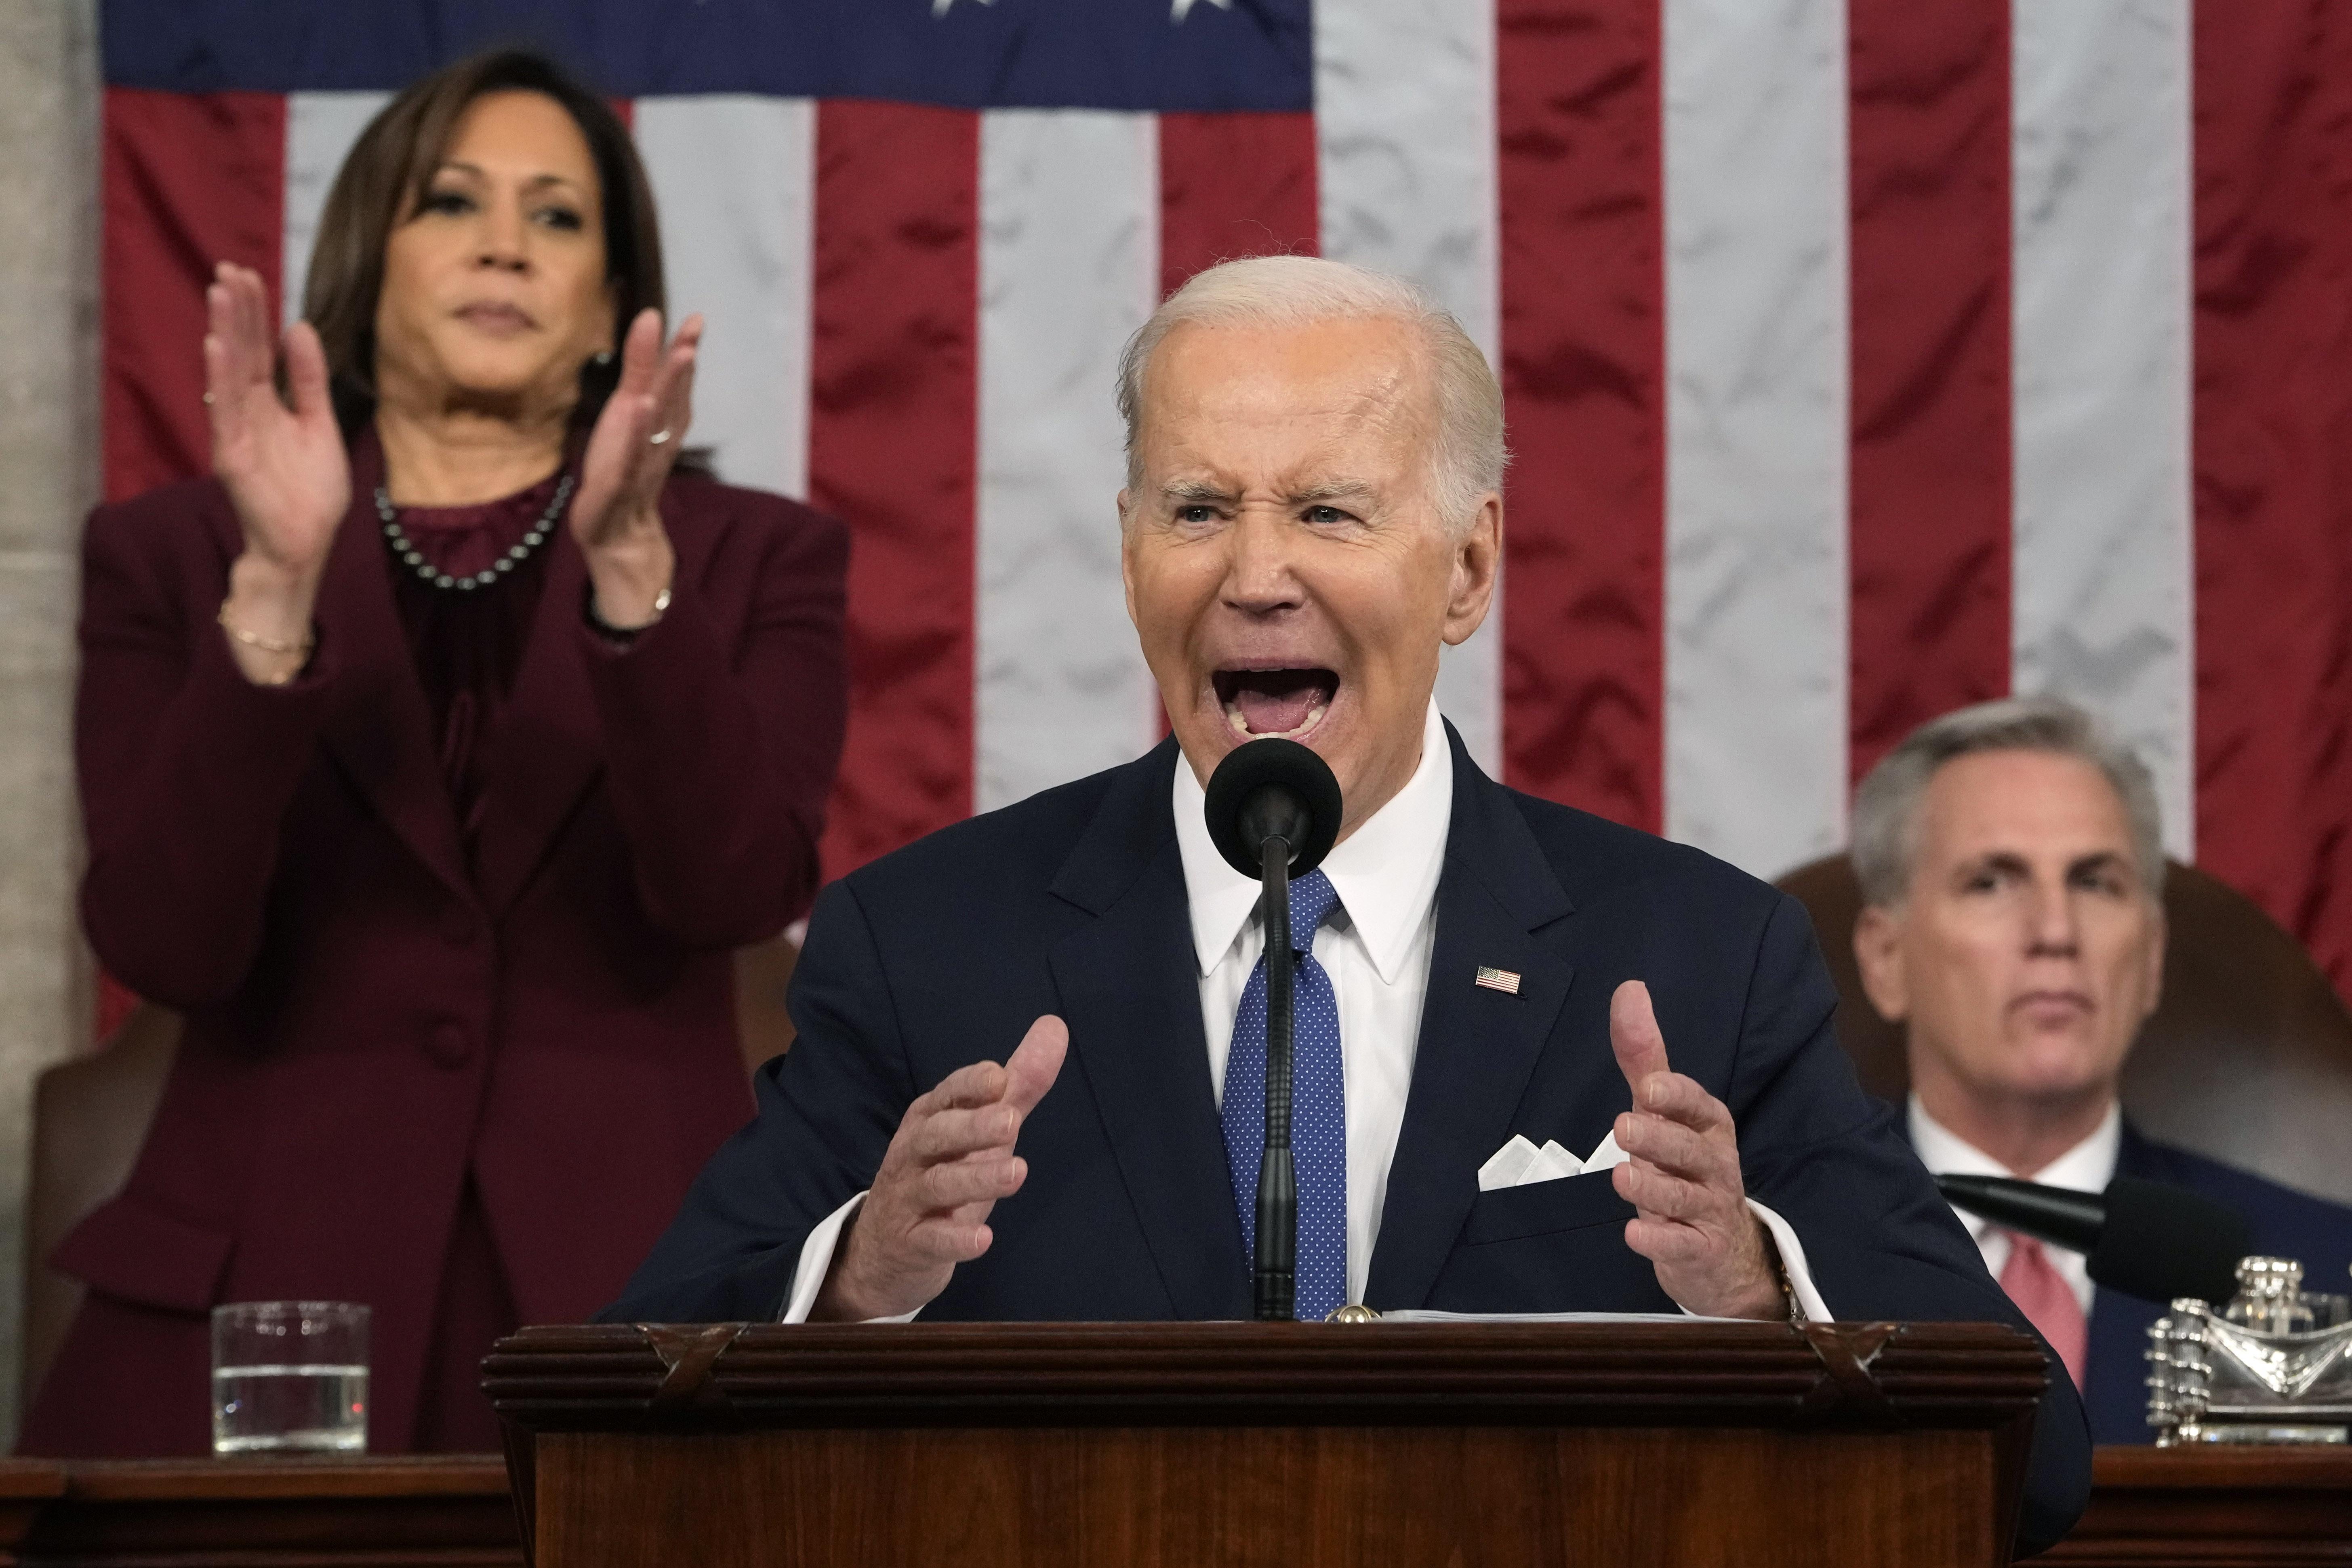 Joe Biden speaks into a microphone while Kamala Harris stands up to clap and Kevin McCarthy remains seated.